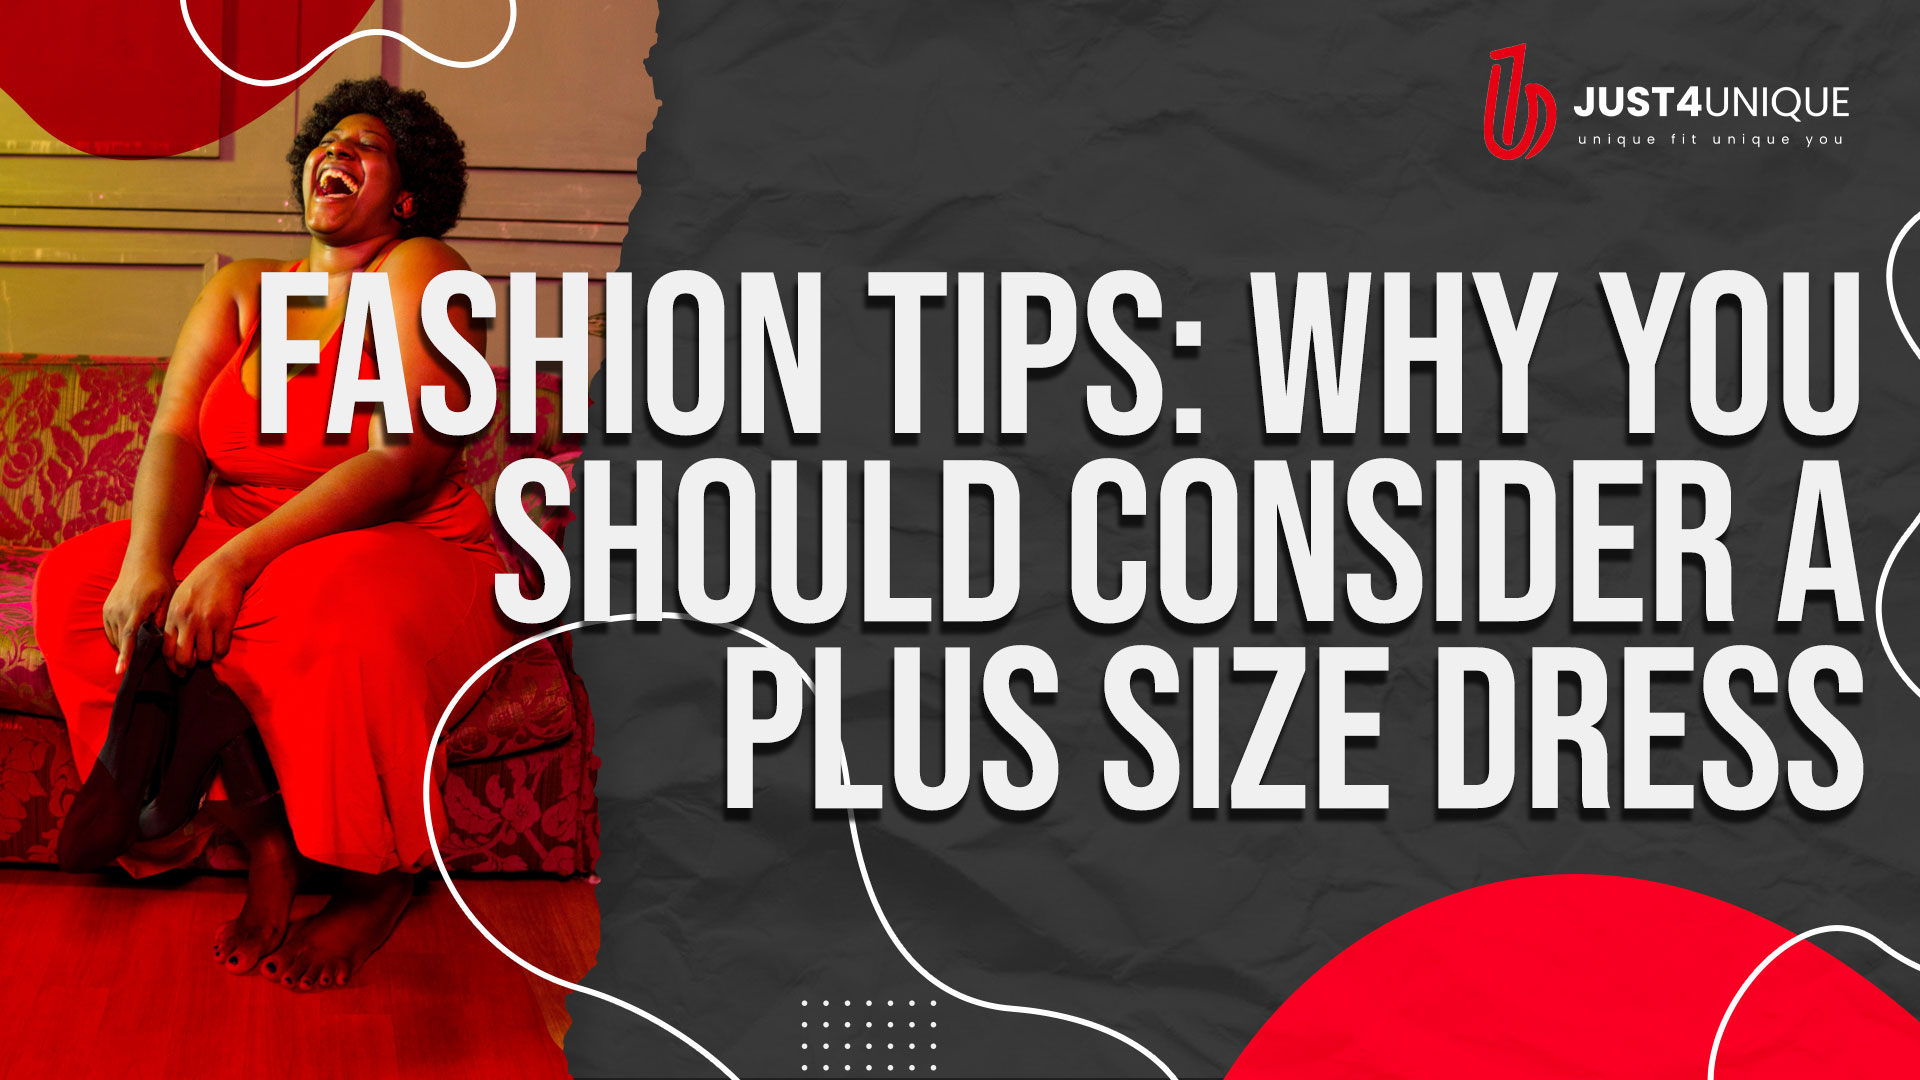 Fashion Tips: Why You Should Consider a Plus Size Dress